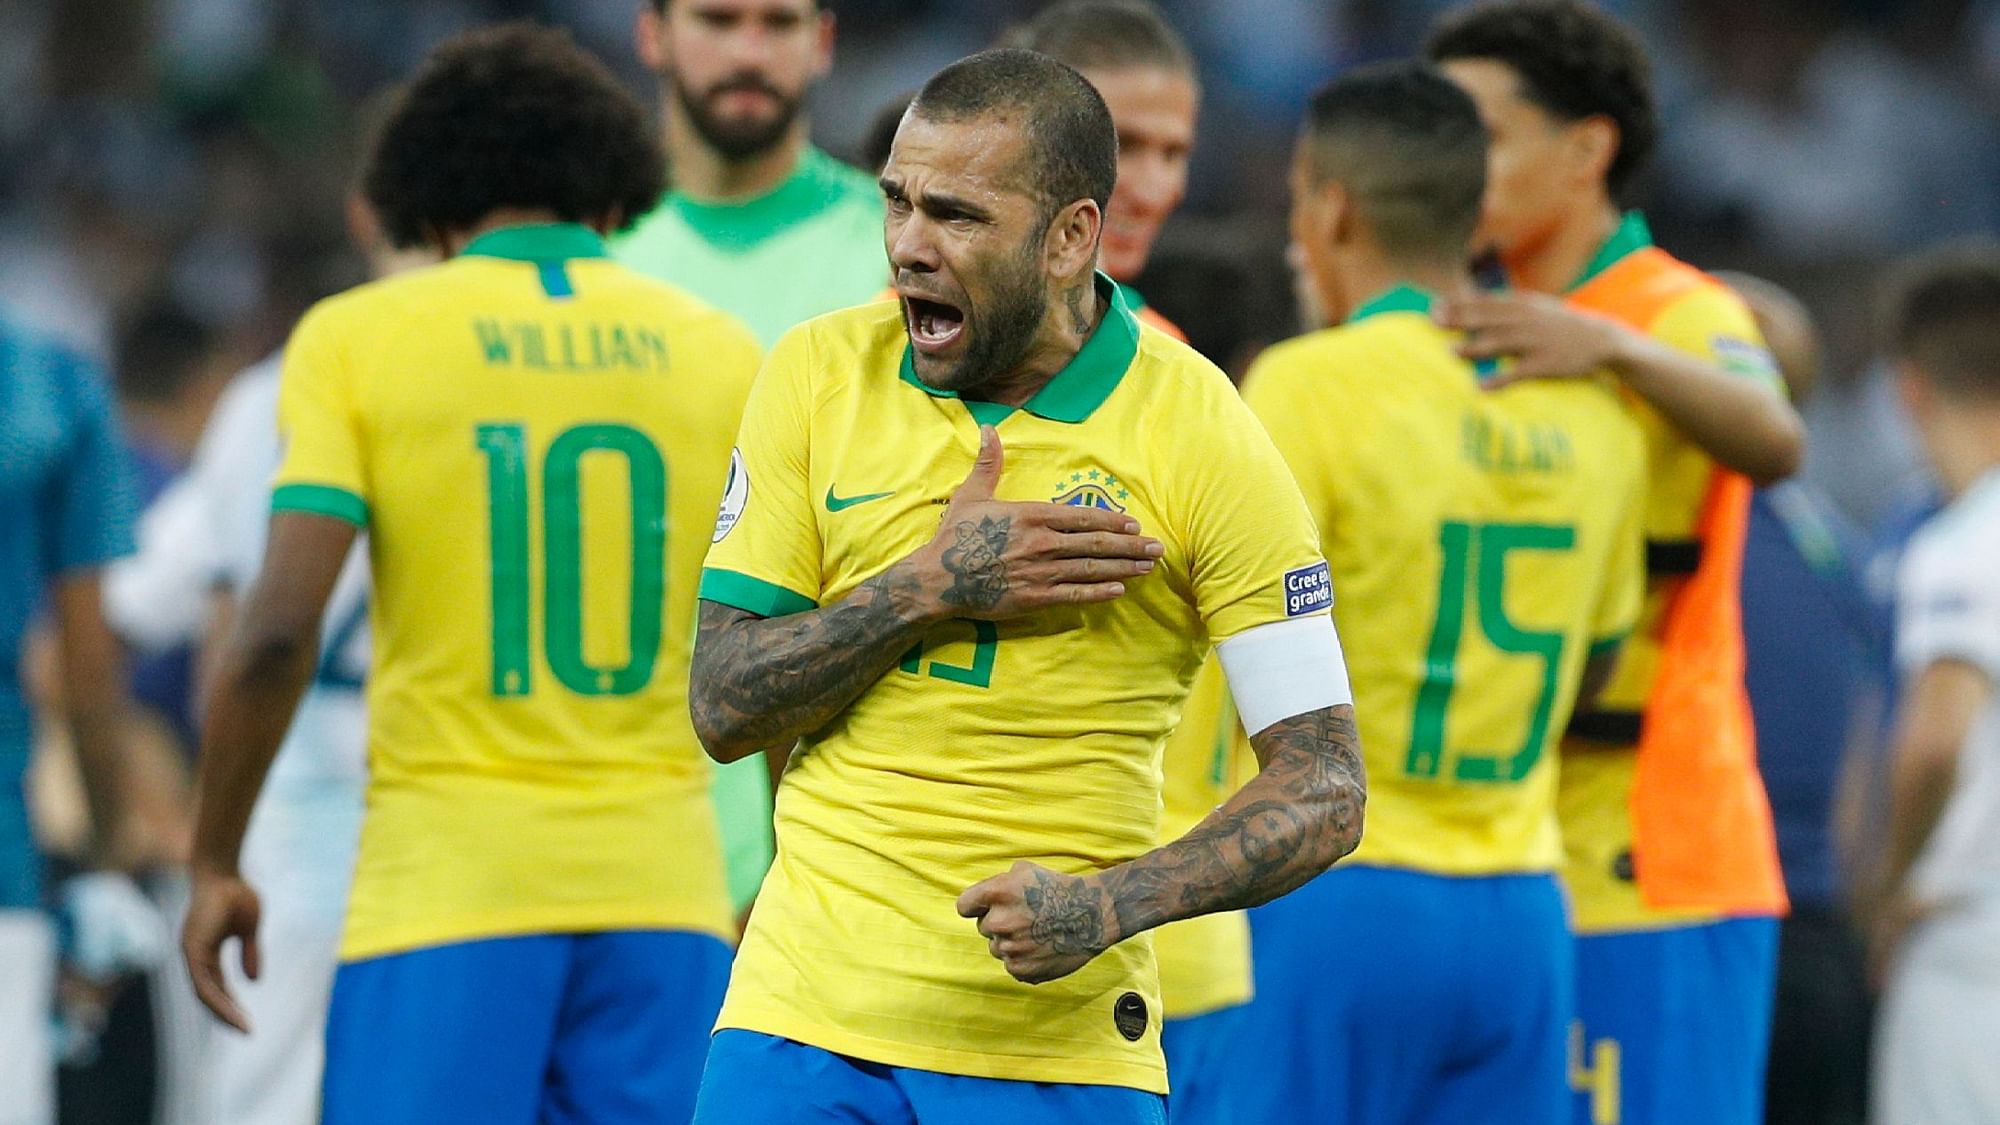 Brazil’s Dani Alves celebrates his team’s 2-0 victory over Argentina at the end of their Copa America semifinal soccer match at Mineirao stadium in Belo Horizonte.